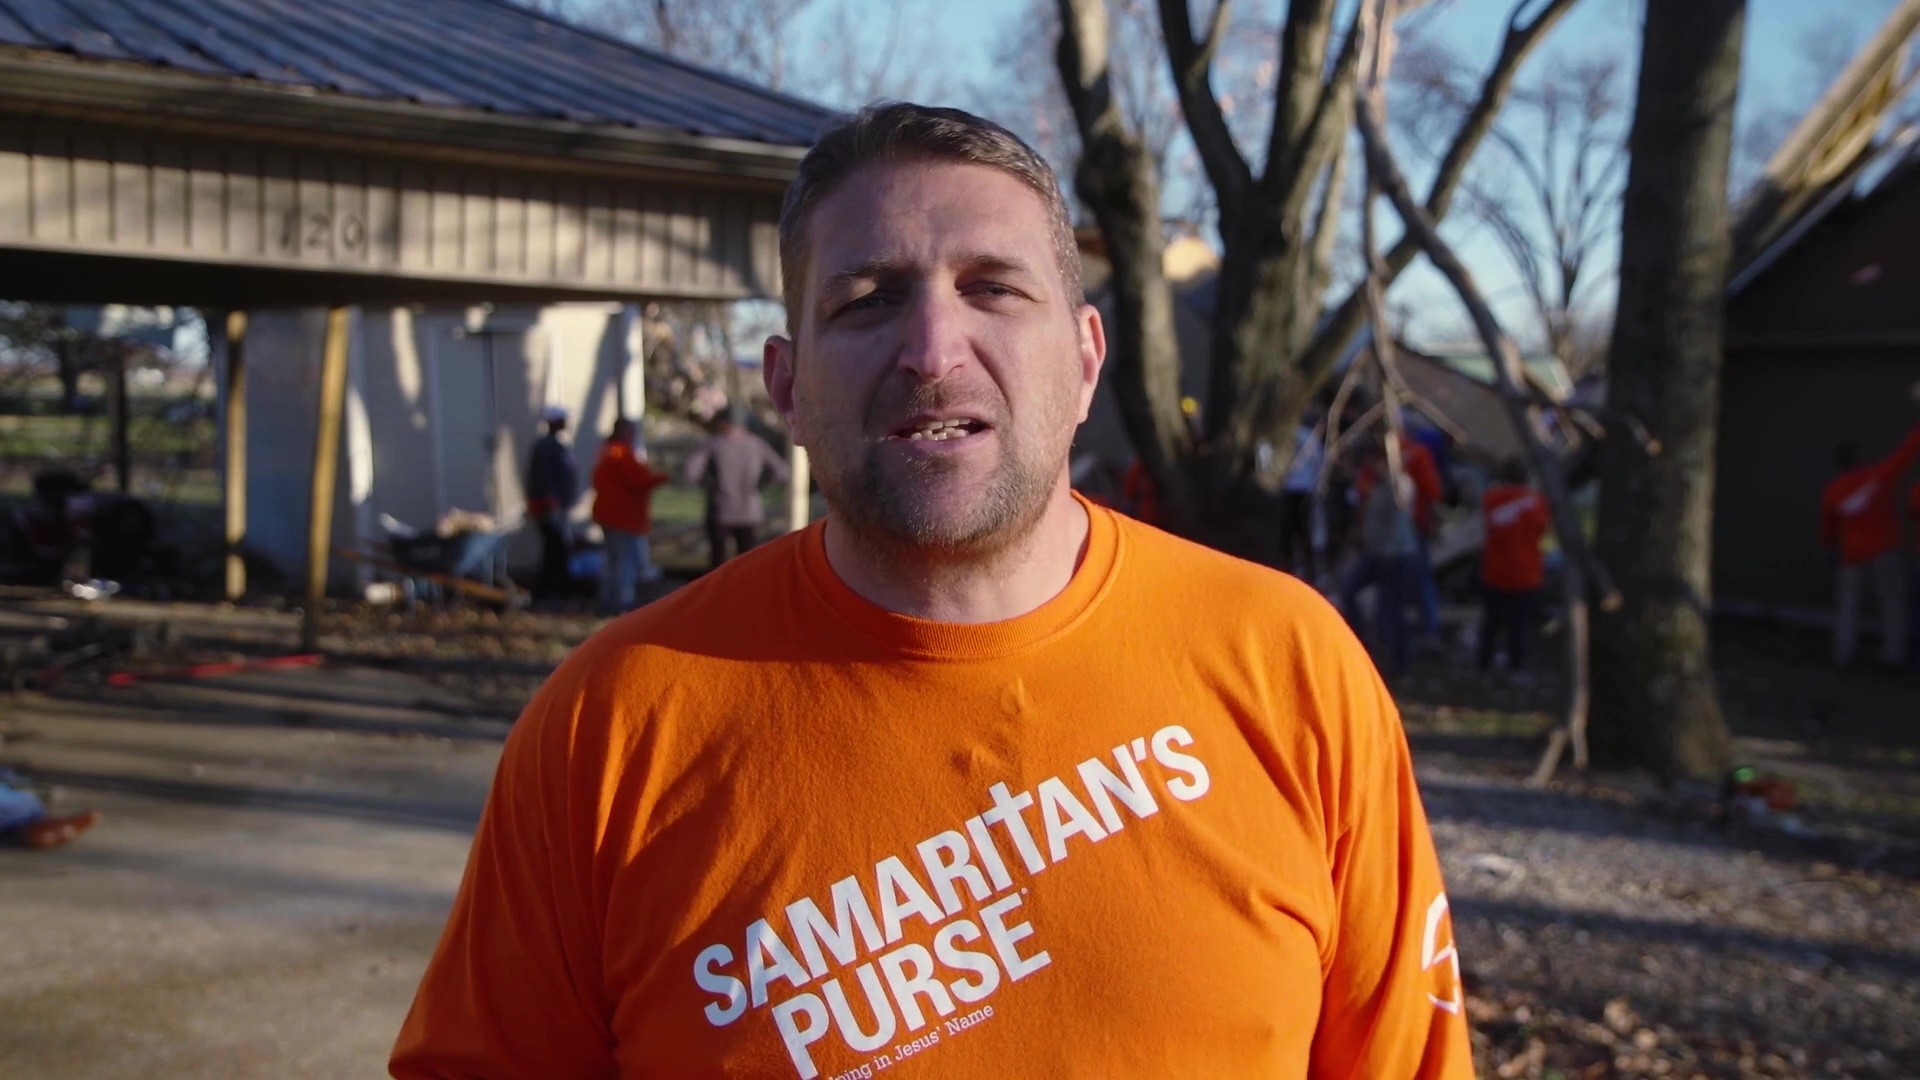 Samaritan’s Purse is responding in northeast Arkansas where tornadoes caused widespread damage and loss of life.